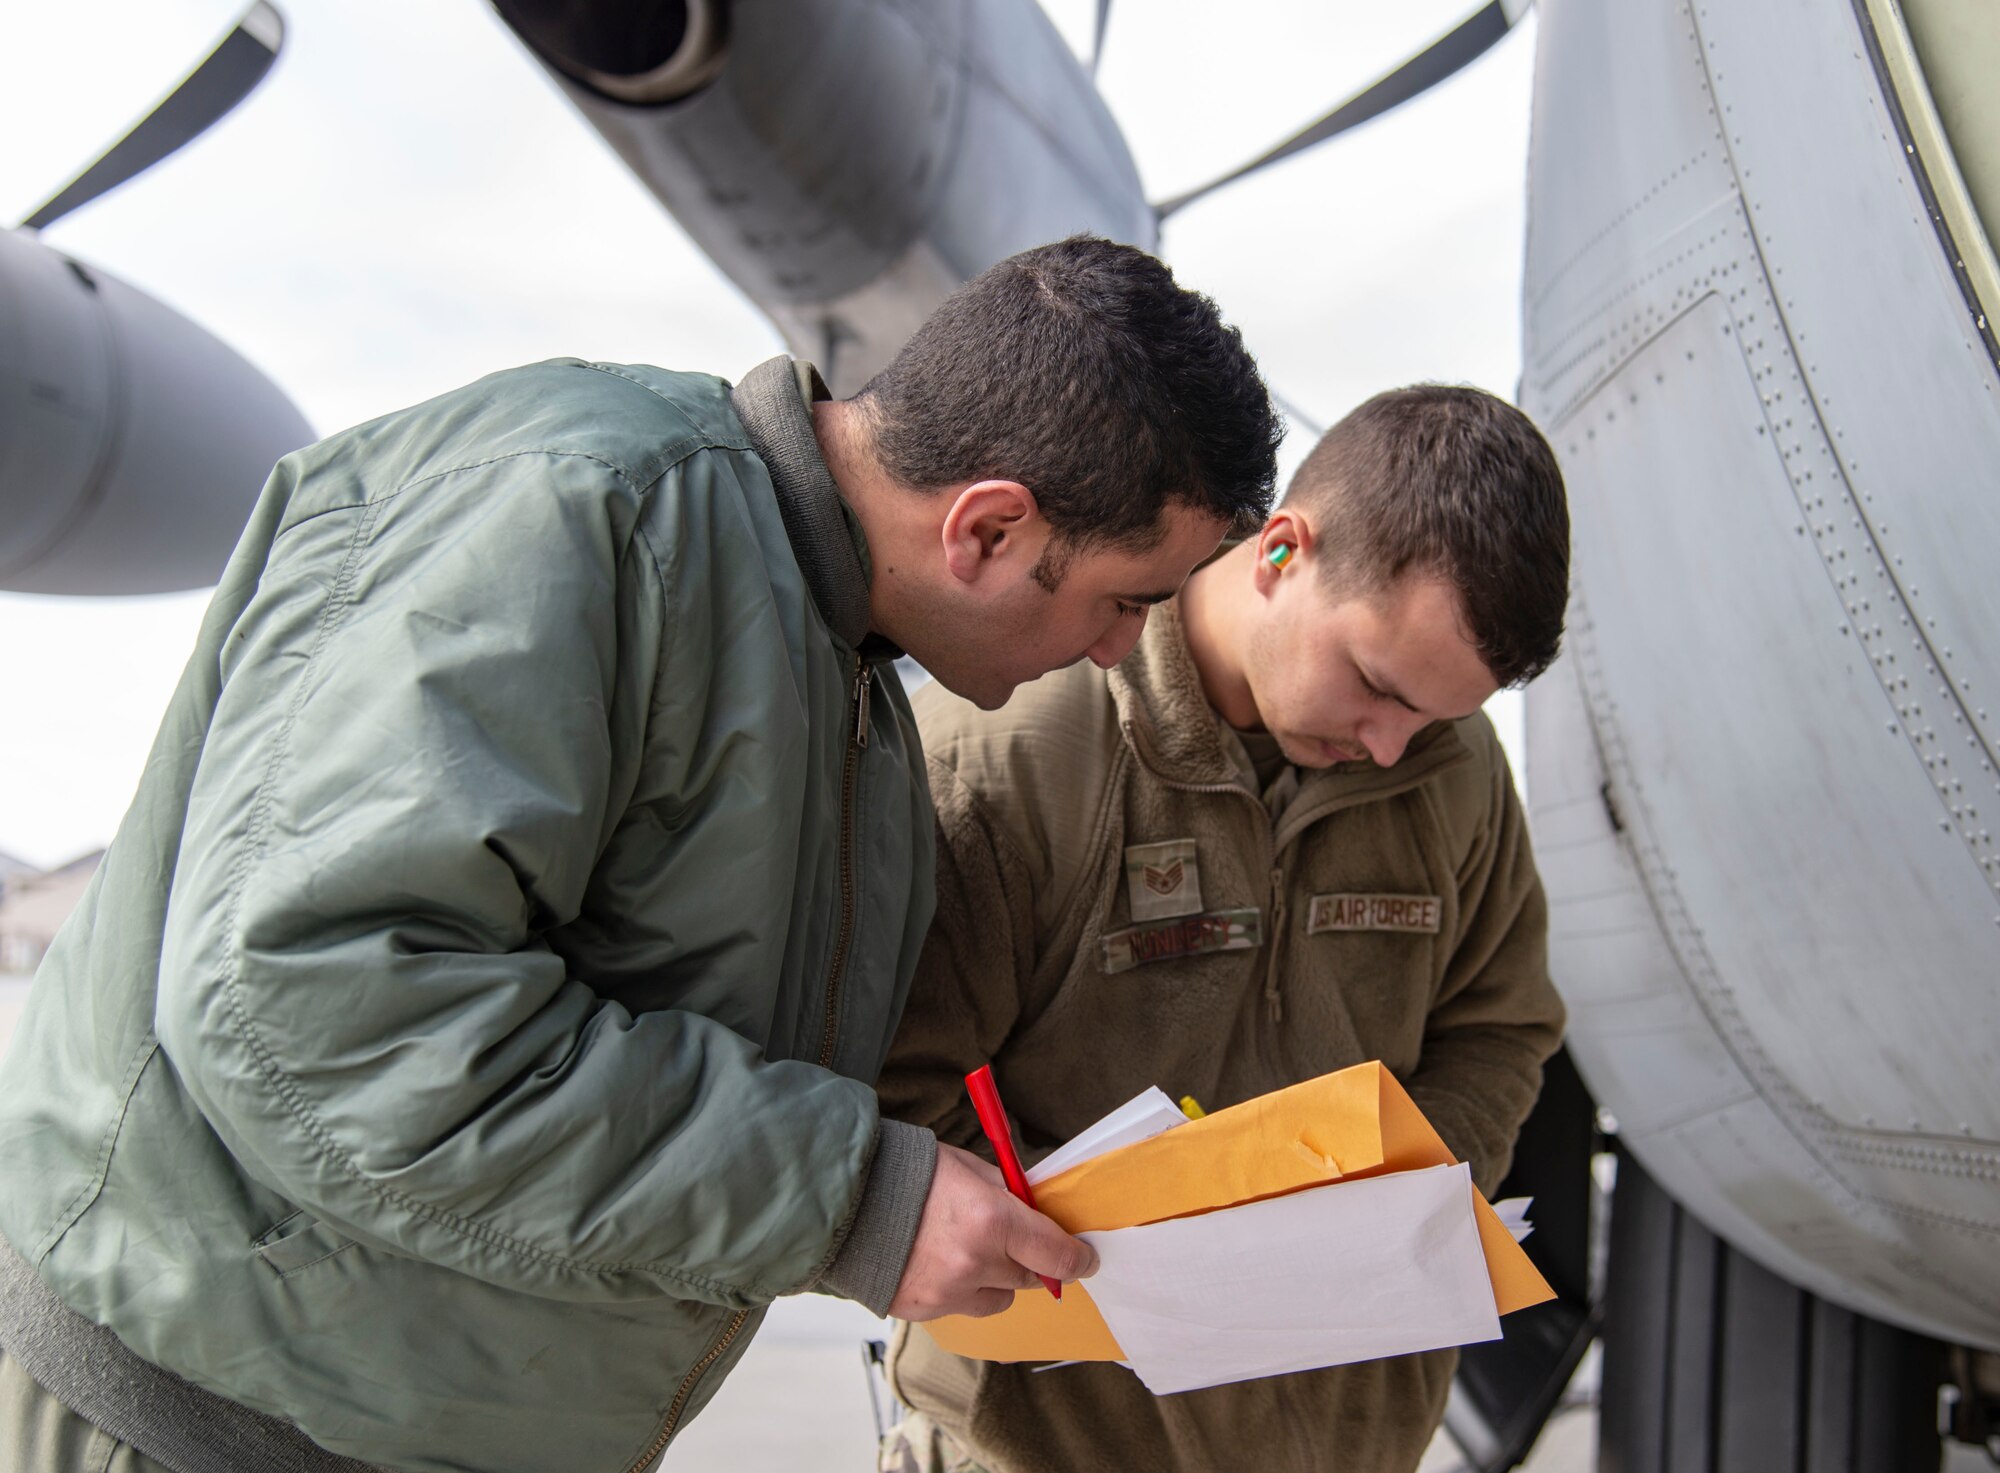 Staff Sgt. Austin Nunnery, 436th Aerial Port Squadron ramp controller, reviews foreign military sales cargo shipping documents with a Tunisian air force C-130J Super Hercules aircrew member at Dover Air Force Base, Delaware, March 10, 2022. The U.S. and Tunisia have enjoyed strong diplomatic relations for over 200 years, beginning when the two countries signed the Treaty of Peace and Friendship in 1797. Due to its strategic geographic location, Dover AFB supports approximately $3.5 billion worth of FMS operations annually. (U.S. Air Force photo by Roland Balik)